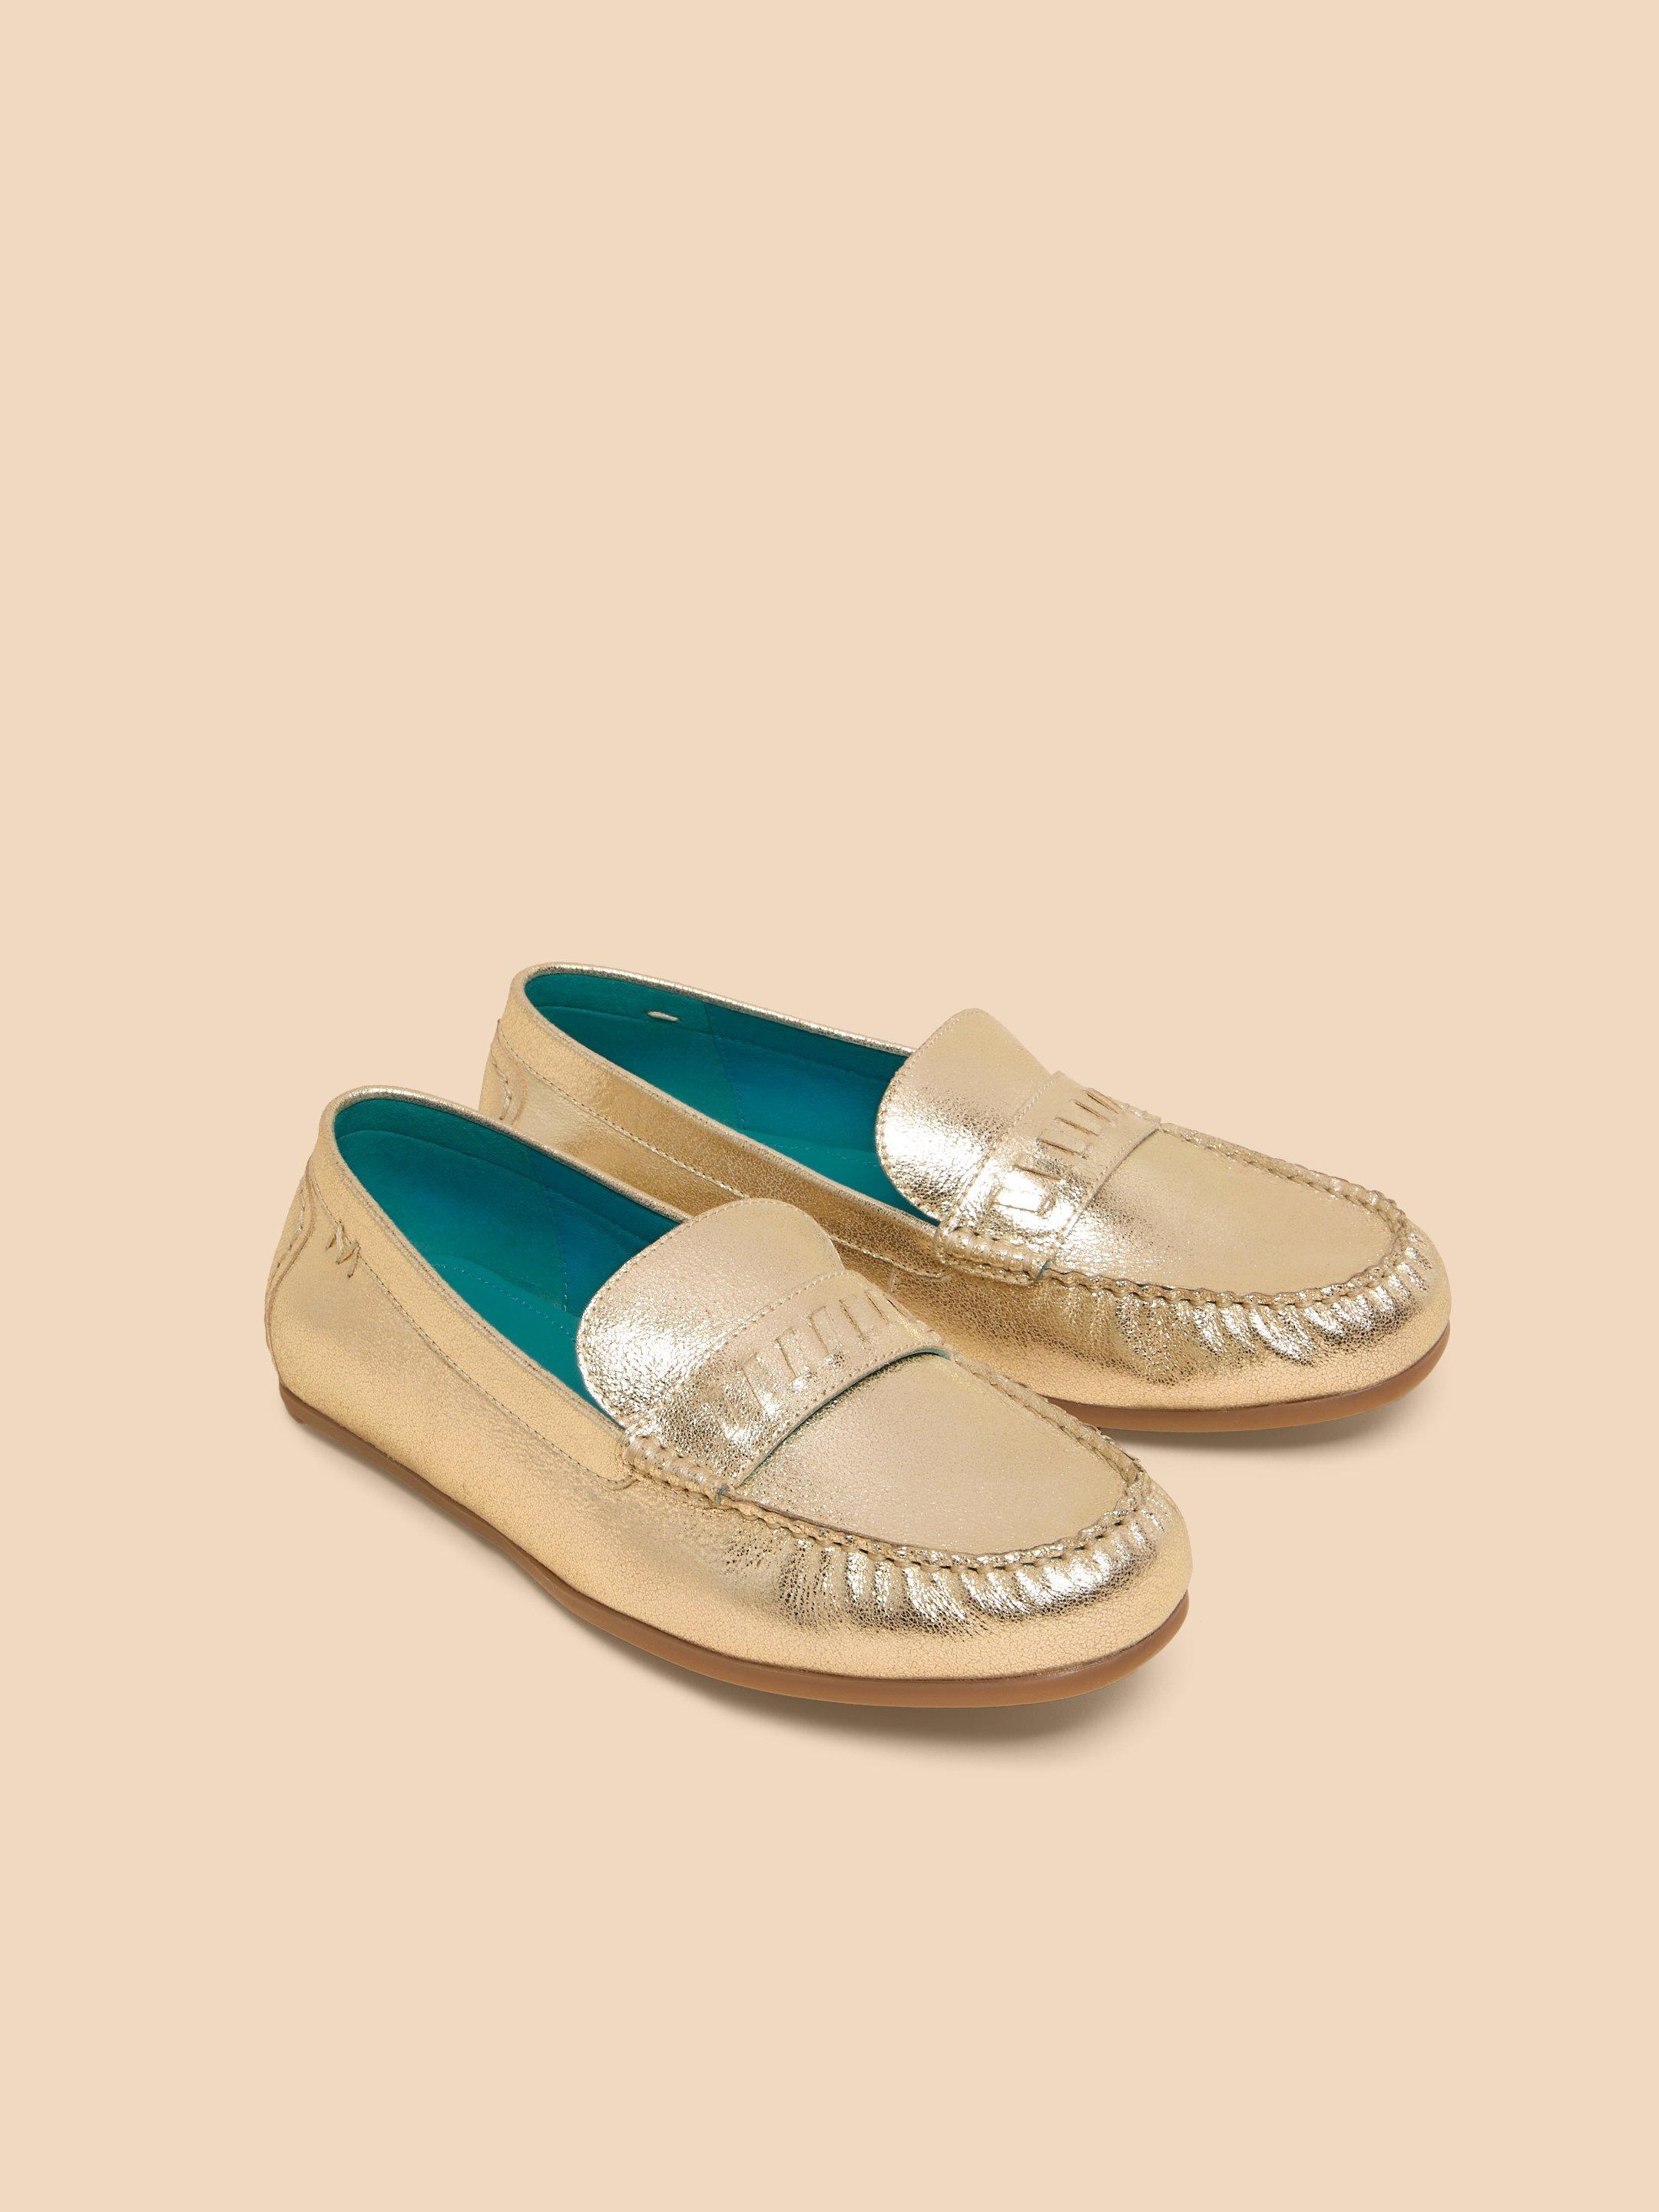 Mayflower Suede Moccasin